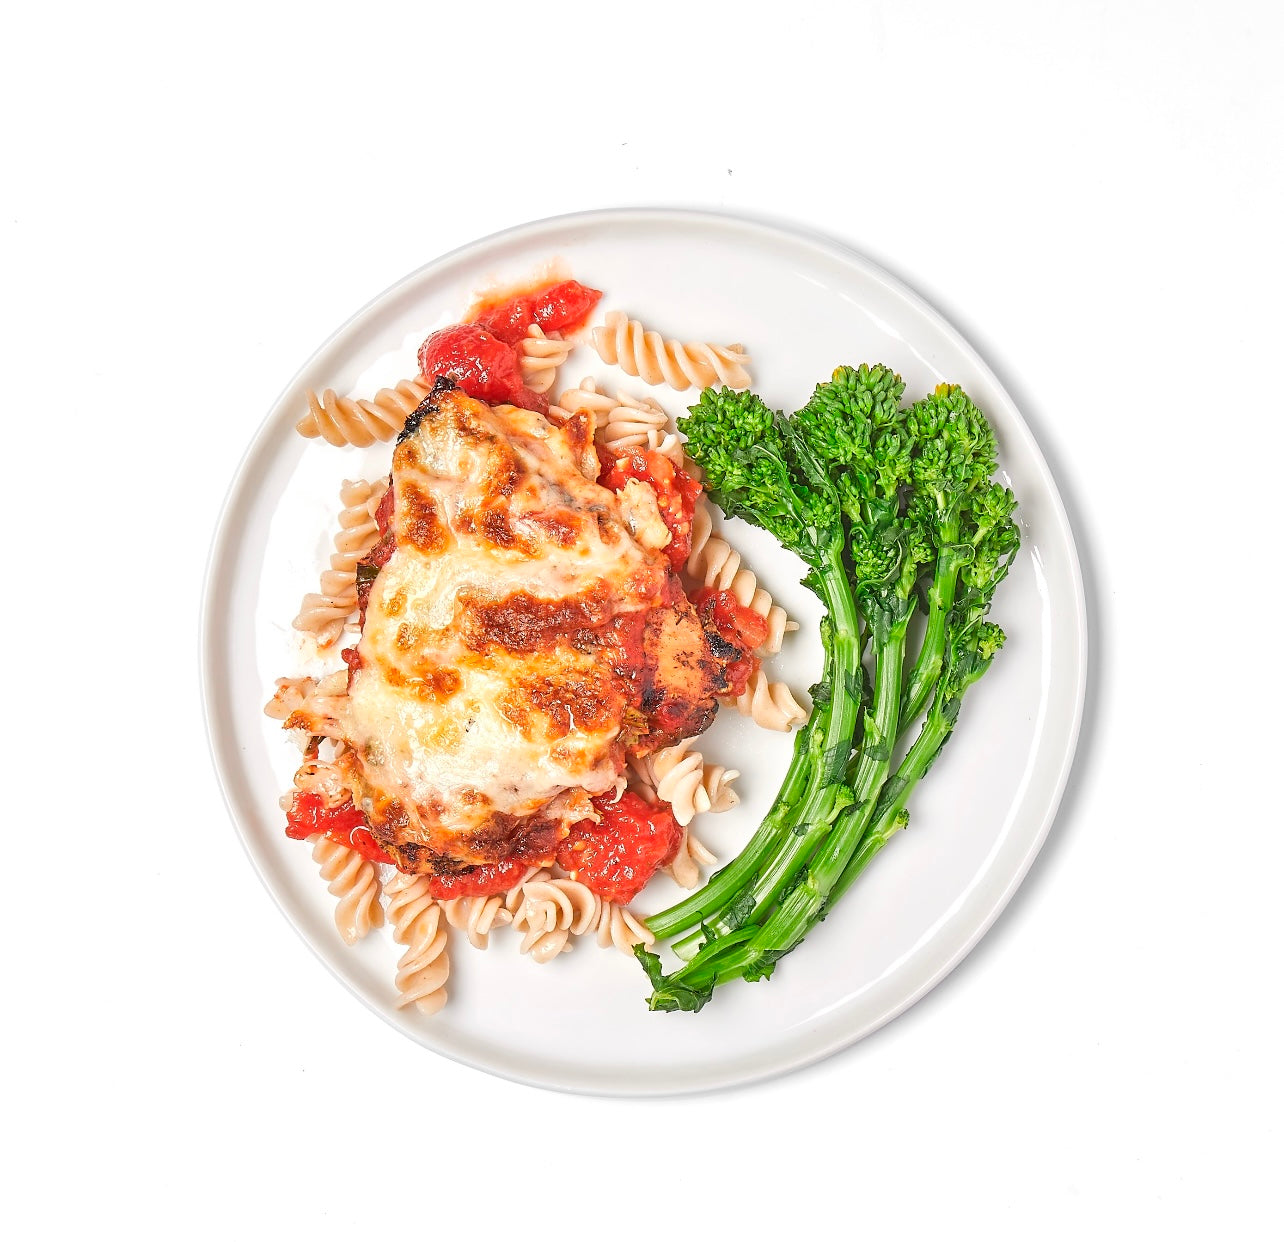 grilled chicken margherita azuluna foods Premium Pasture-Raised ready-to-eat Meals Delivery